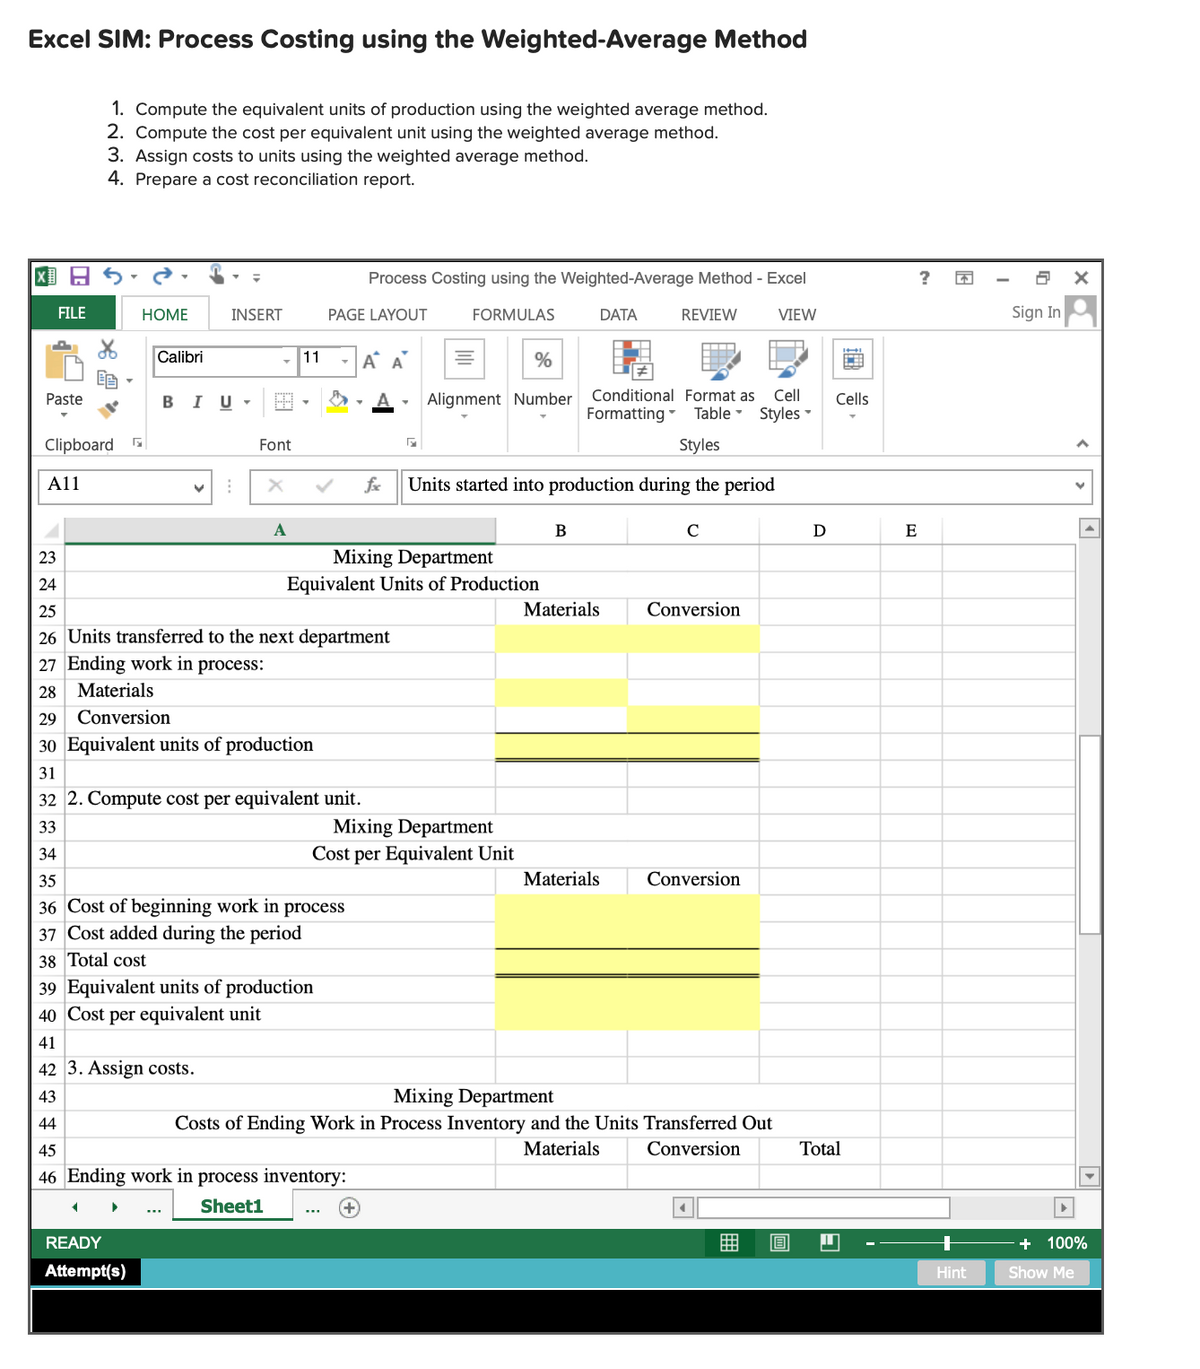 Excel SIM: Process Costing using the Weighted-Average Method
1. Compute the equivalent units of production using the weighted average method.
2. Compute the cost per equivalent unit using the weighted average method.
3. Assign costs to units using the weighted average method.
4. Prepare a cost reconciliation report.
国日ら
Process Costing using the Weighted-Average Method - Excel
FILE
НОМЕ
INSERT
PAGE LAYOUT
FORMULAS
DATA
REVIEW
VIEW
Sign In
Calibri
11
-A A
%
Paste
BIU-
Alignment Number
Conditional Format as
Cell
Cells
Formatting -
Table - Styles
Clipboard
Font
Styles
A11
fe
Units started into production during the period
B
C
E
Mixing Department
Equivalent Units of Production
23
24
25
Materials
Conversion
26 Units transferred to the next department
27 Ending work in process:
28 Materials
29
Conversion
30 Equivalent units of production
31
32 2. Compute cost per equivalent unit.
Mixing Department
Cost per Equivalent Unit
33
34
35
Materials
Conversion
36 Cost of beginning work in process
37 Cost added during the period
38 Total cost
39 Equivalent units of production
40 Cost per equivalent unit
41
42 3. Assign costs.
Mixing Department
Costs of Ending Work in Process Inventory and the Units Transferred Out
43
44
45
Materials
Conversion
Total
46 Ending work in process inventory:
Sheet1
READY
曲
+ 100%
Attempt(s)
Hint
Show Me
